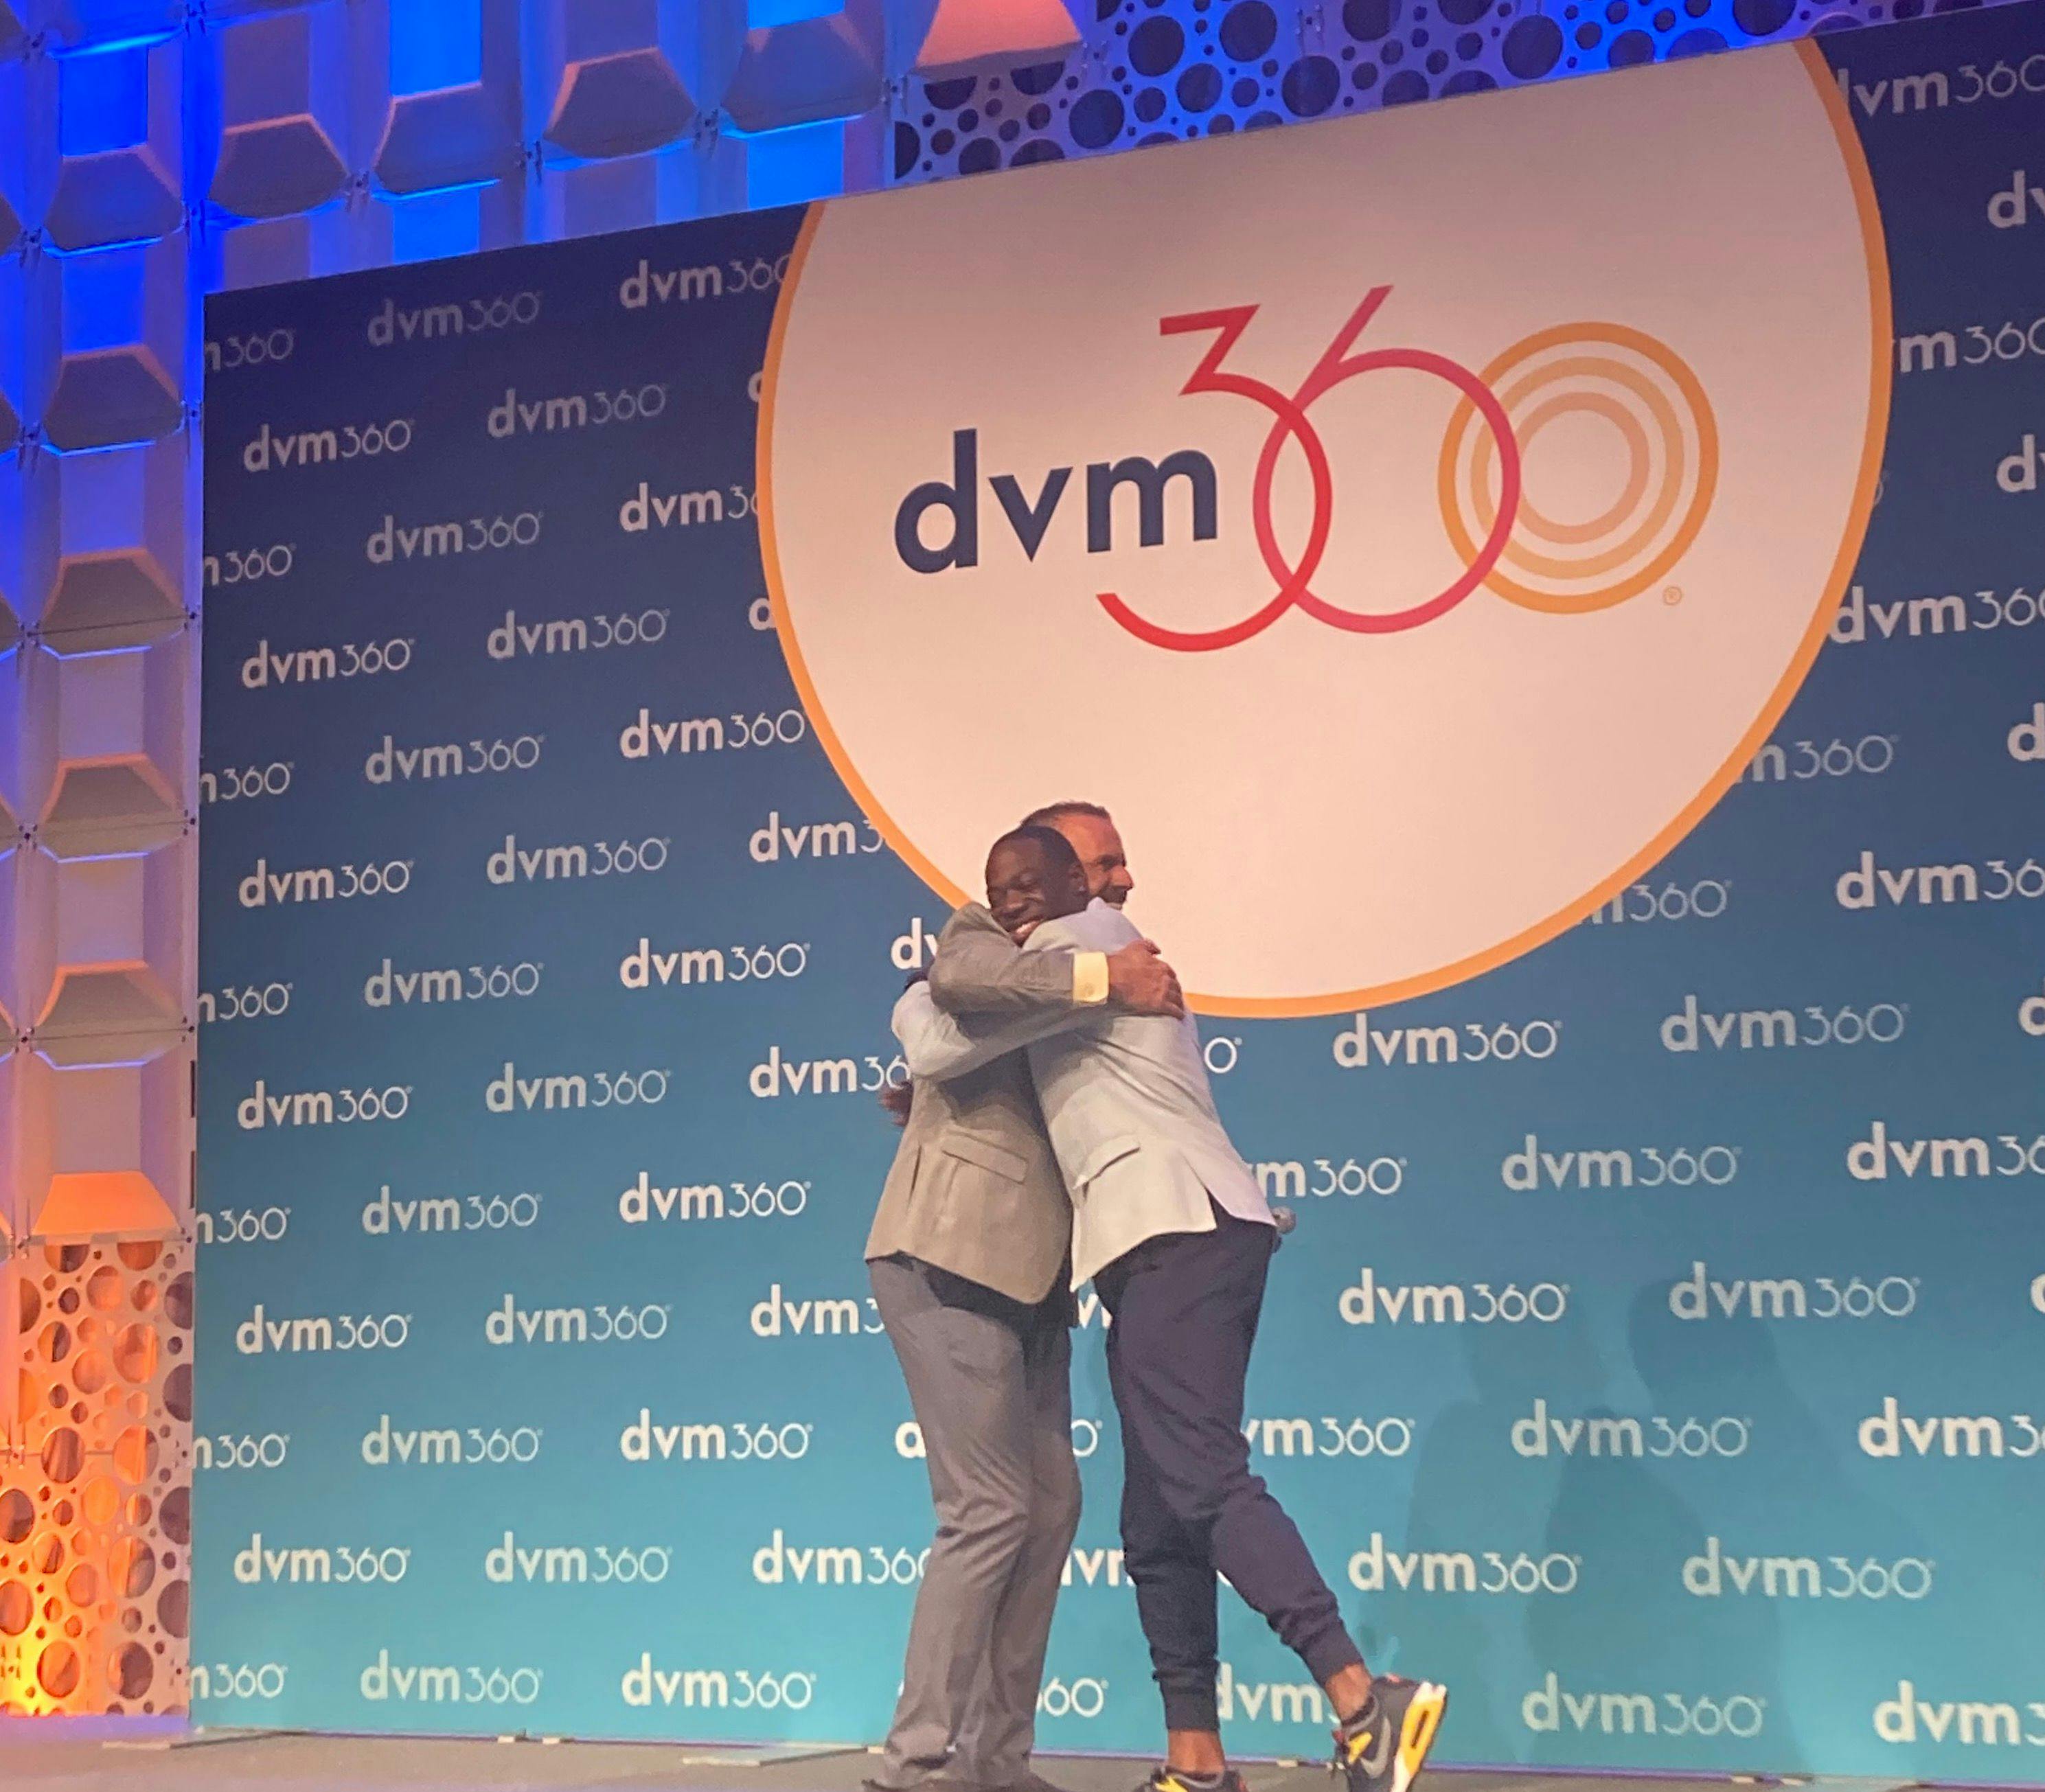 Walter Brown, BS, RVTg, VTS (ECC) (right) meets Adam Christman, DVM, MBA, dvm360® chief veterinary officer (left) in an embrace before delivering his keynote address.  